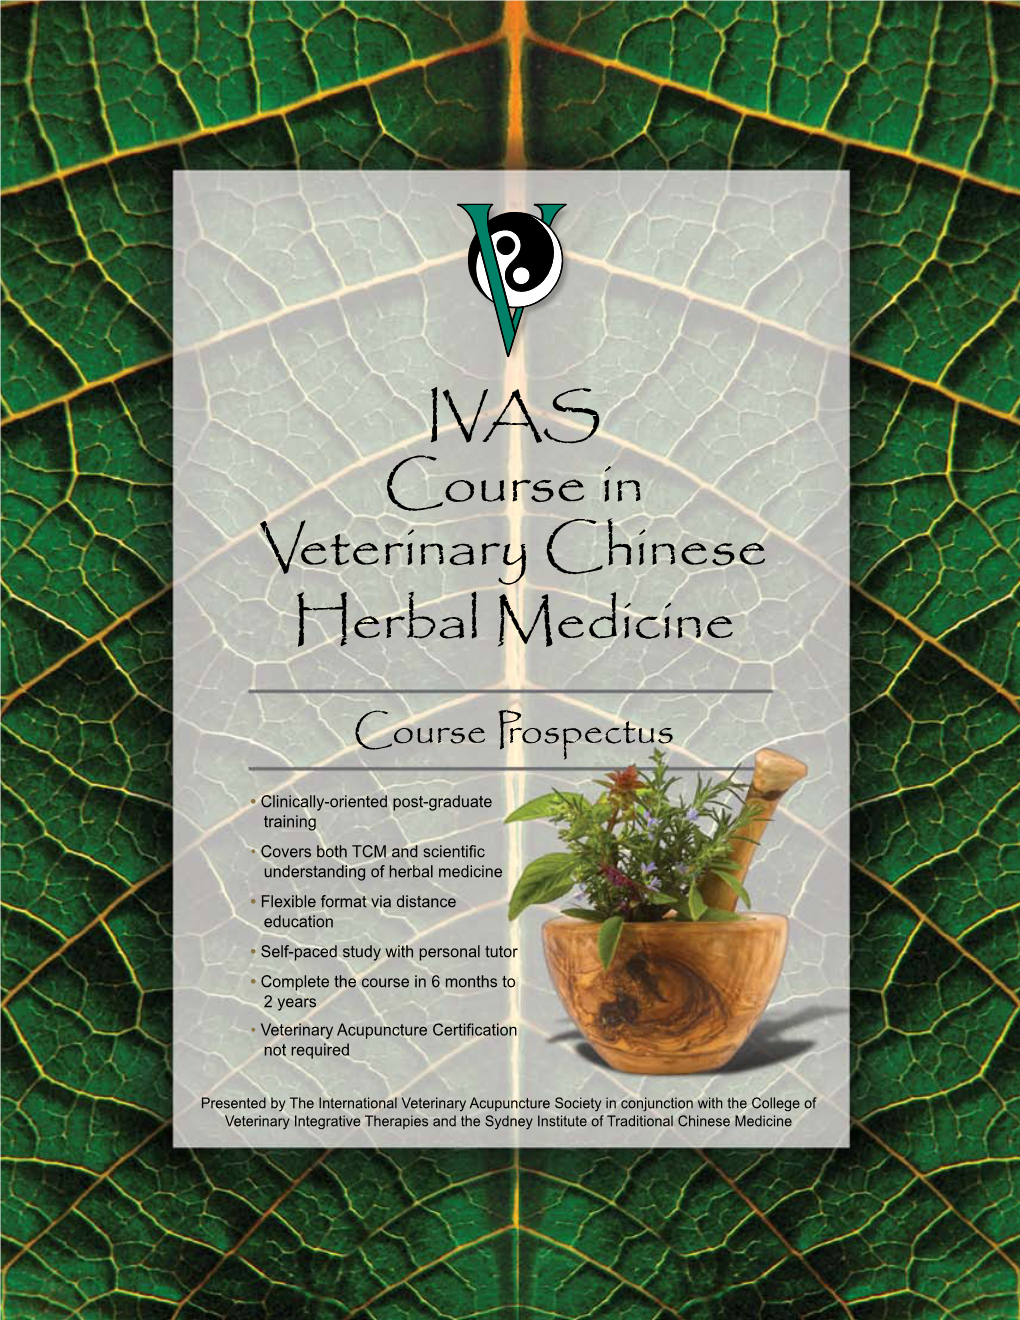 IVAS Course in Veterinary Chinese Herbal Medicine